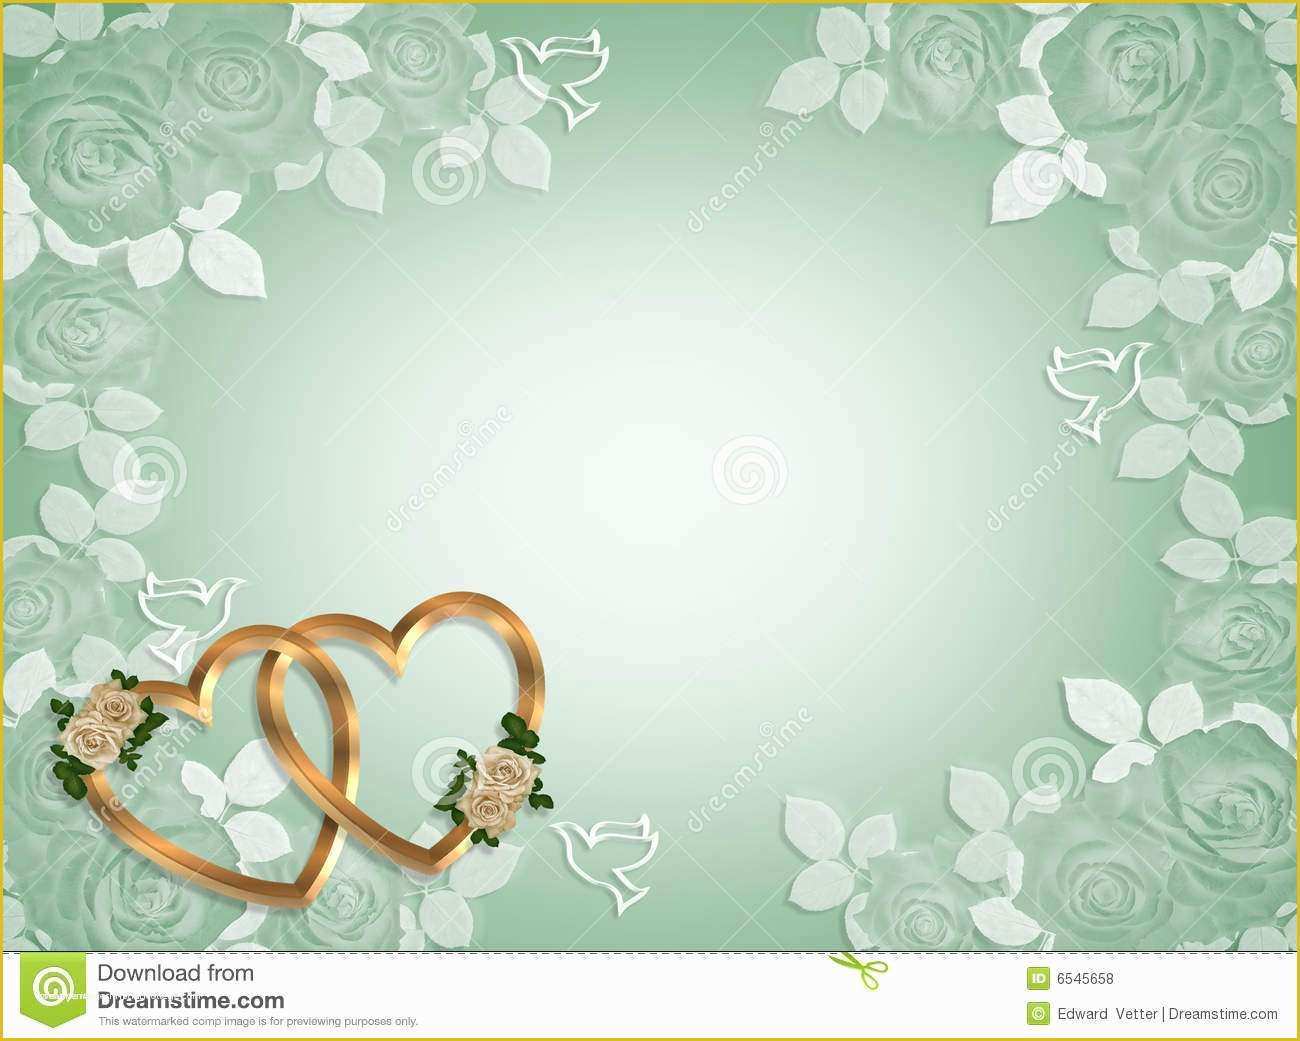 Marriage Templates Free Download Of Wedding Invitation Background Designs Free Luxury